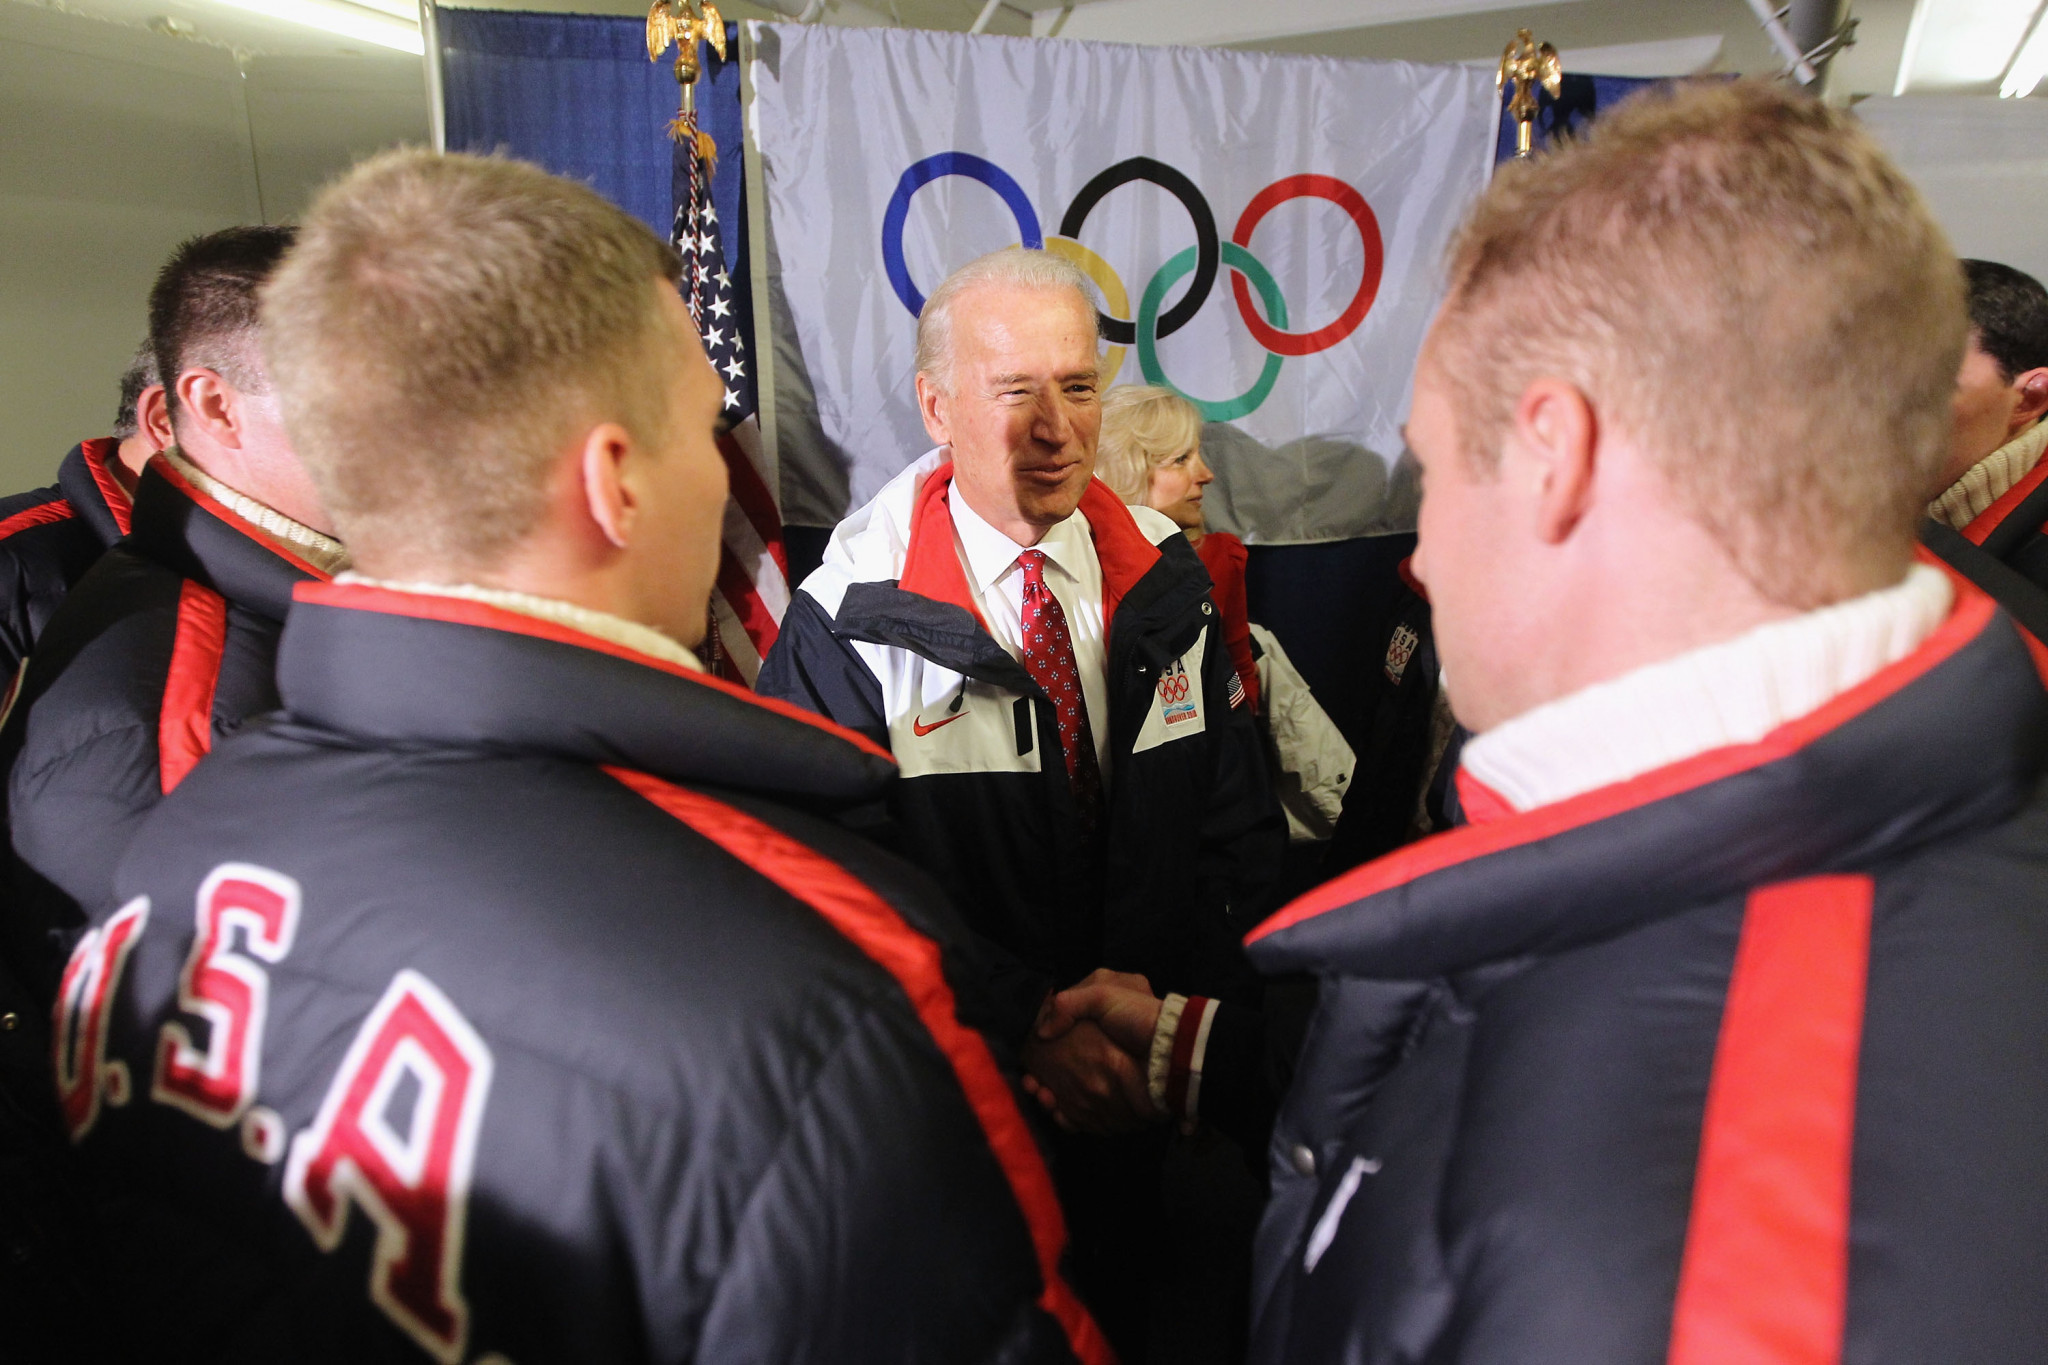 Joe Biden attended part of the Vancouver 2010 Winter Olympics ©Getty Images